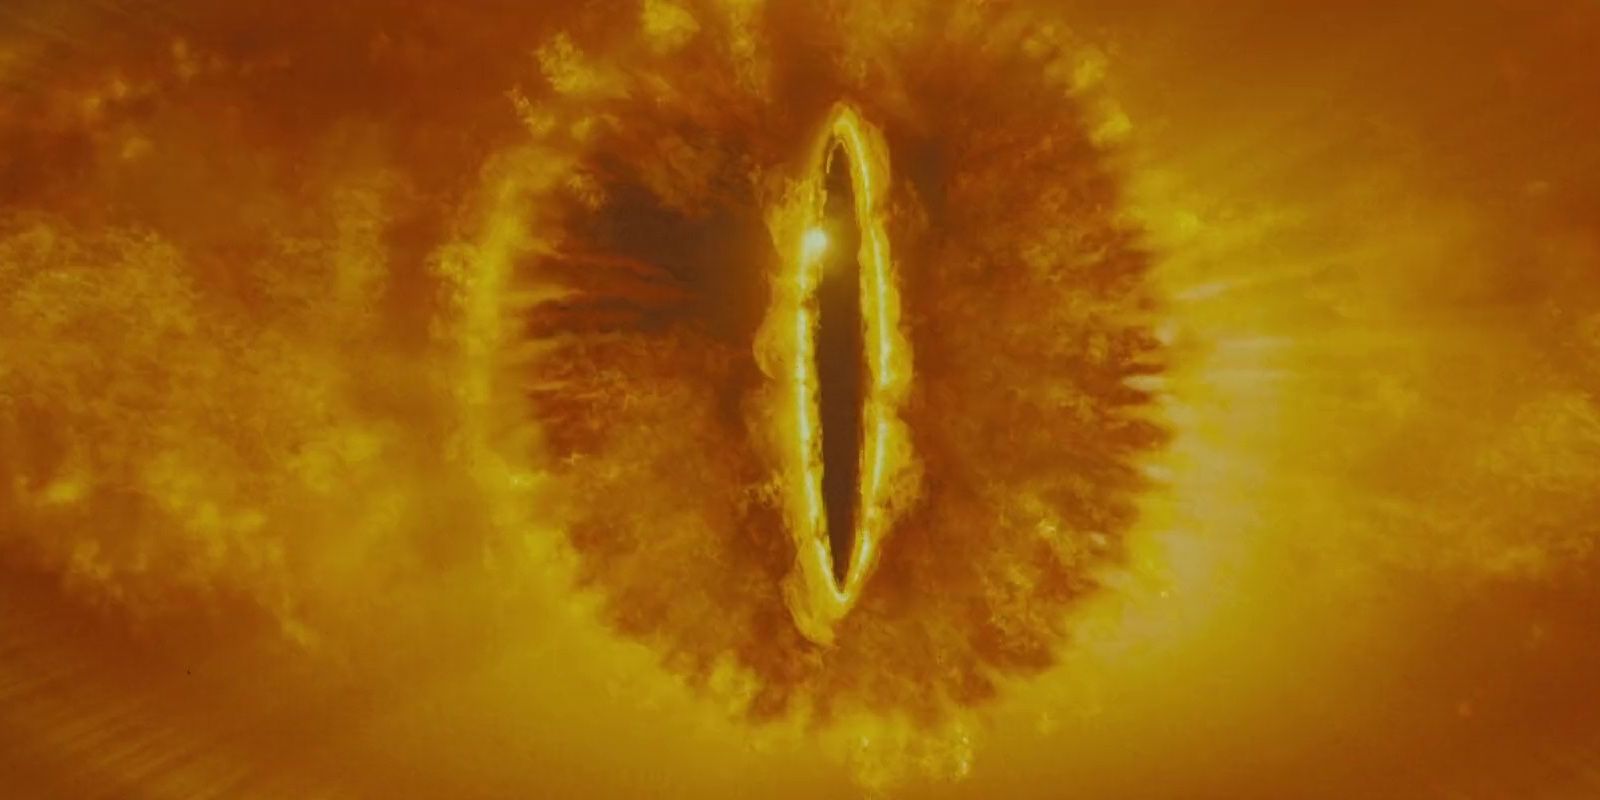 Eye Of Sauron in Lord of the Rings